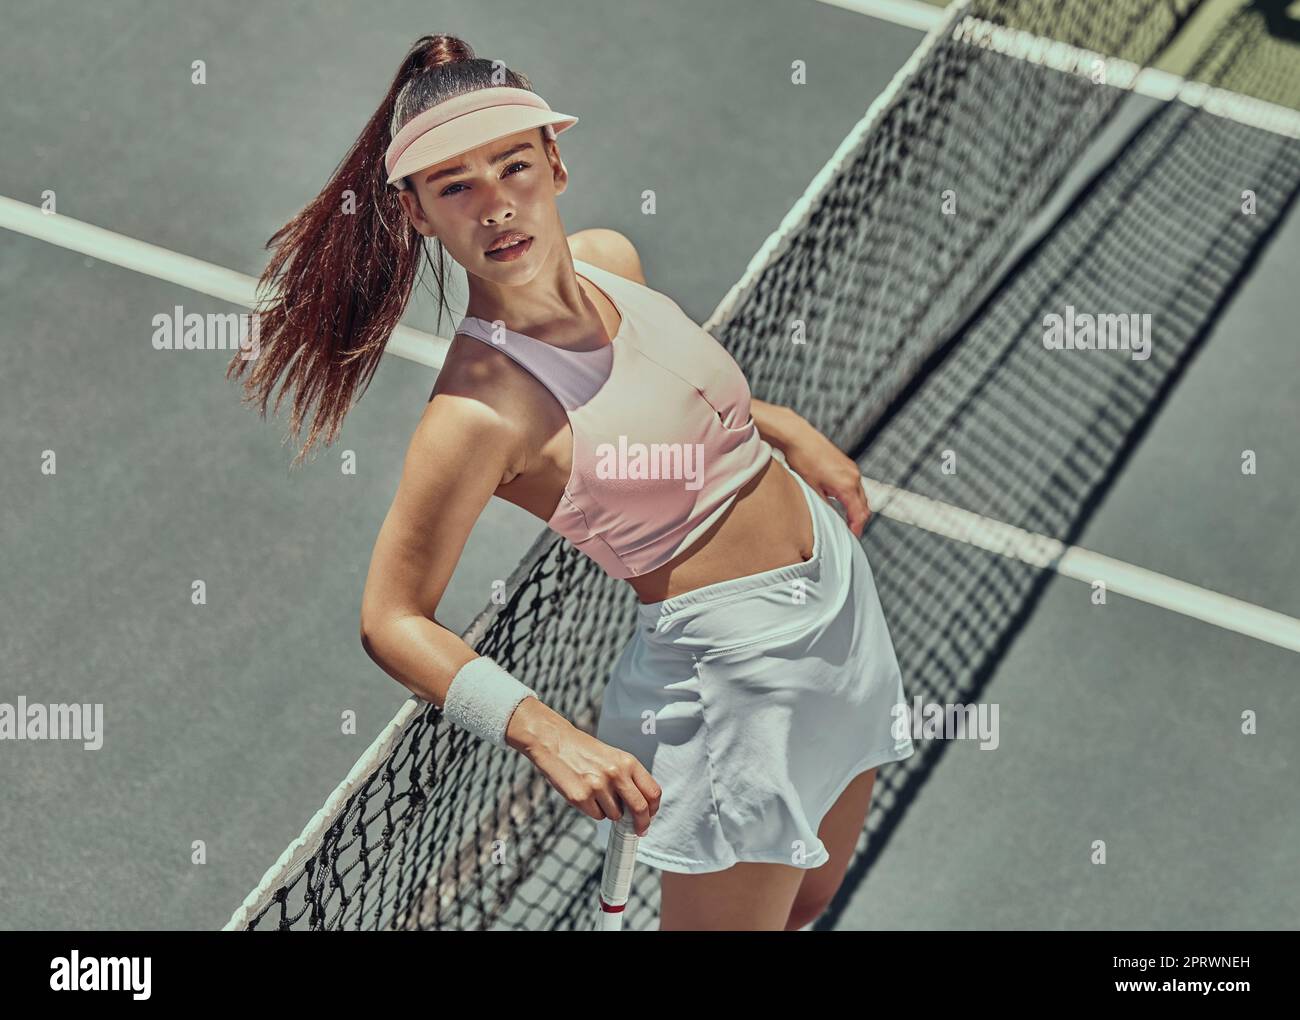 Tennis court, fashion and sports woman, portrait for fitness, exercise and training motivation for a healthy lifestyle. Aesthetic model outdoor for te Stock Photo